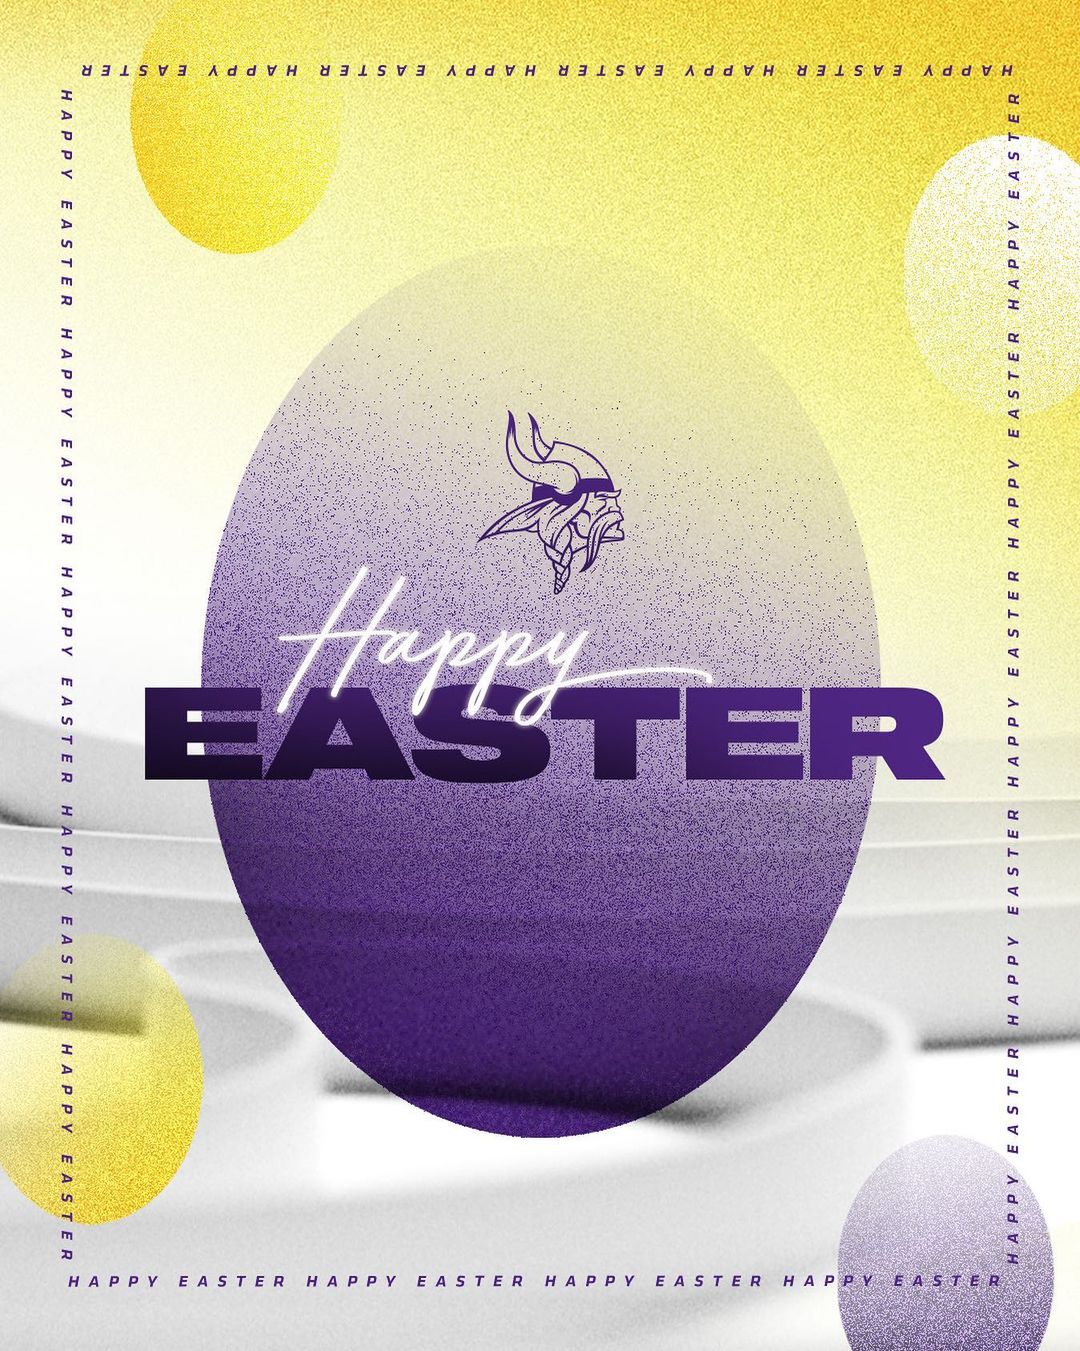 Happy Easter!...